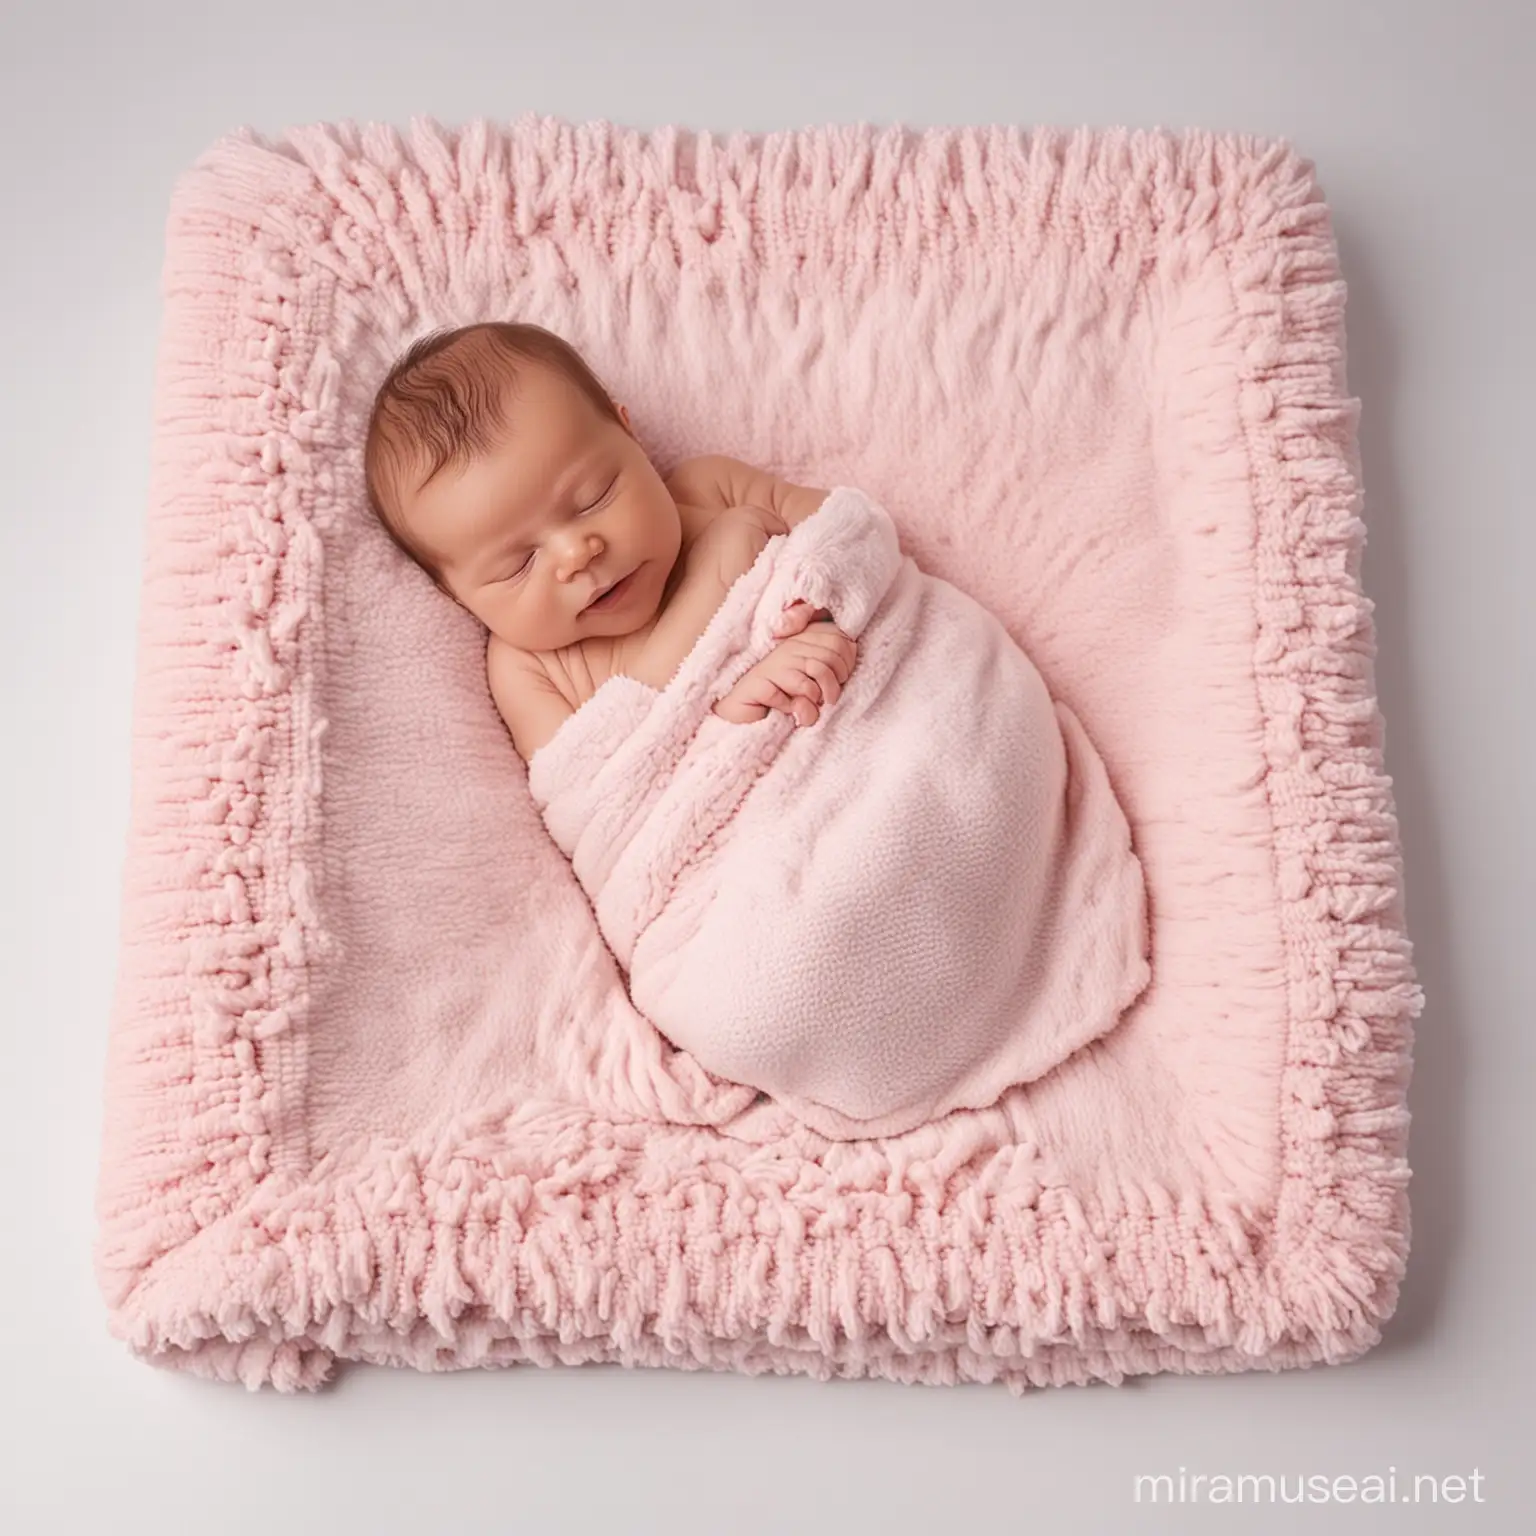 beautiful and soft blanket with bed for newborn. side view
